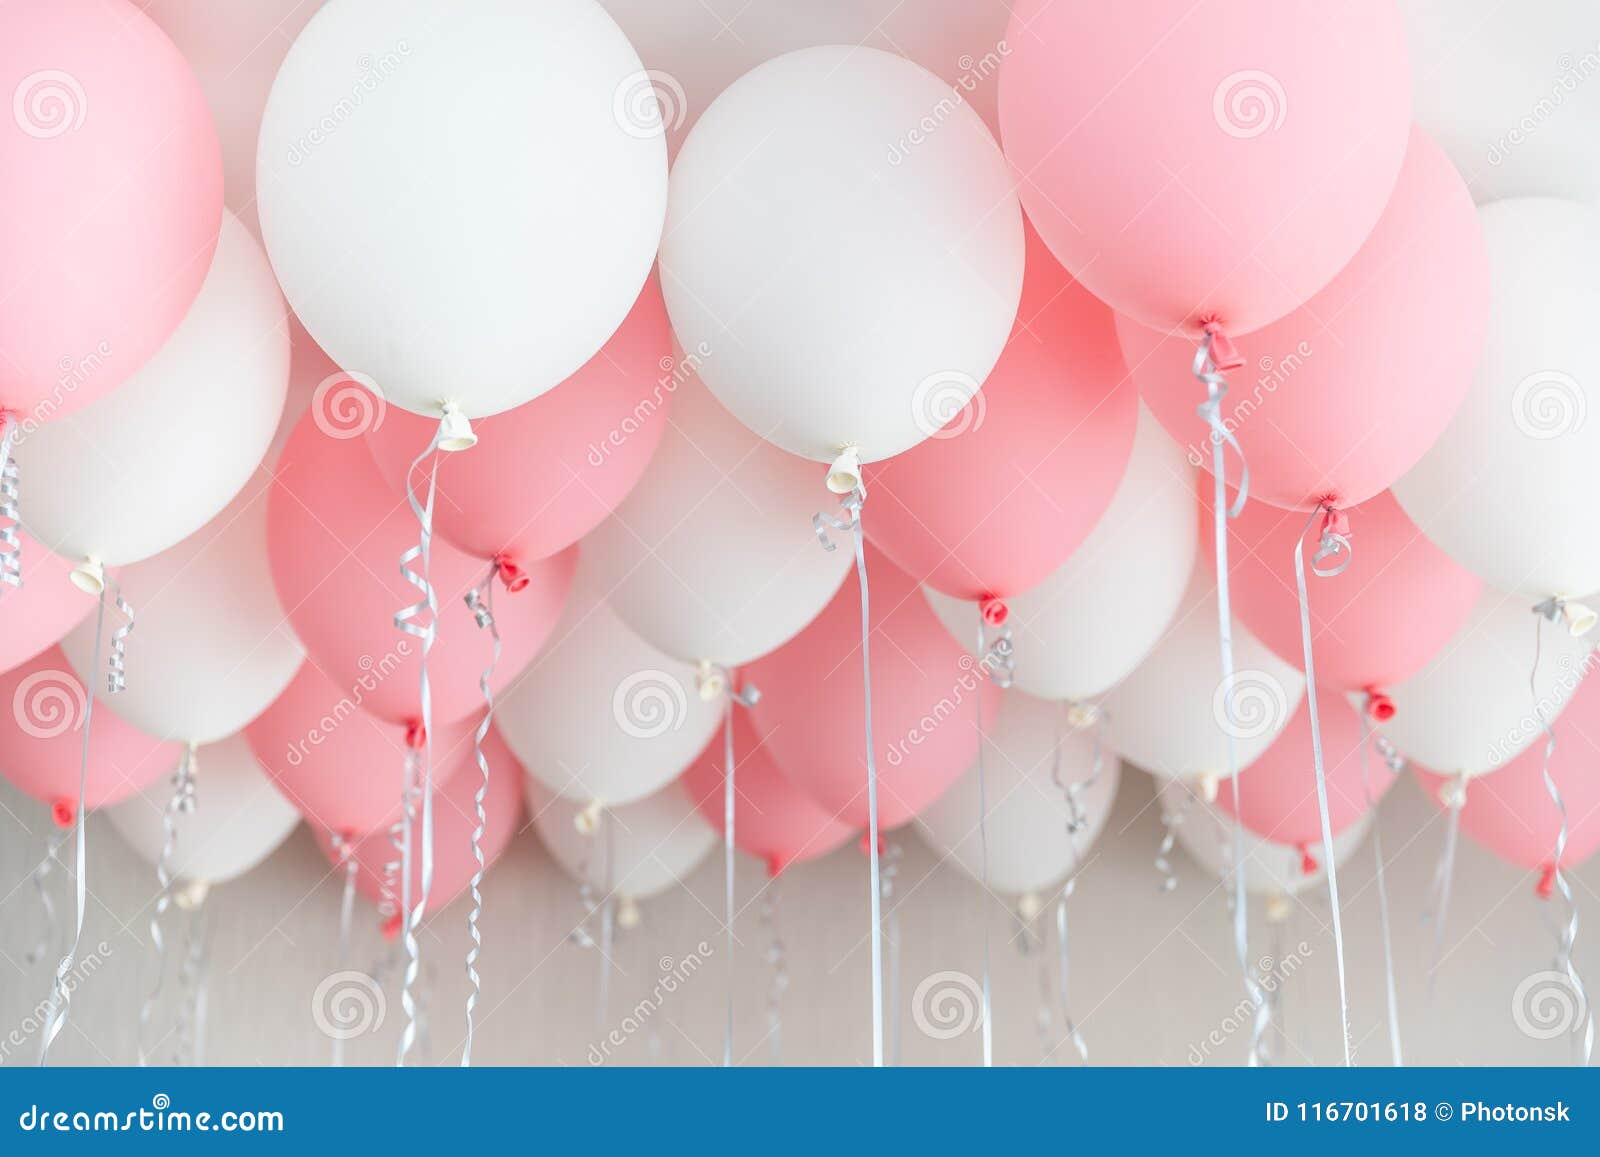 Colourful balloons, pink, white, streamers. Helium Ballon floating